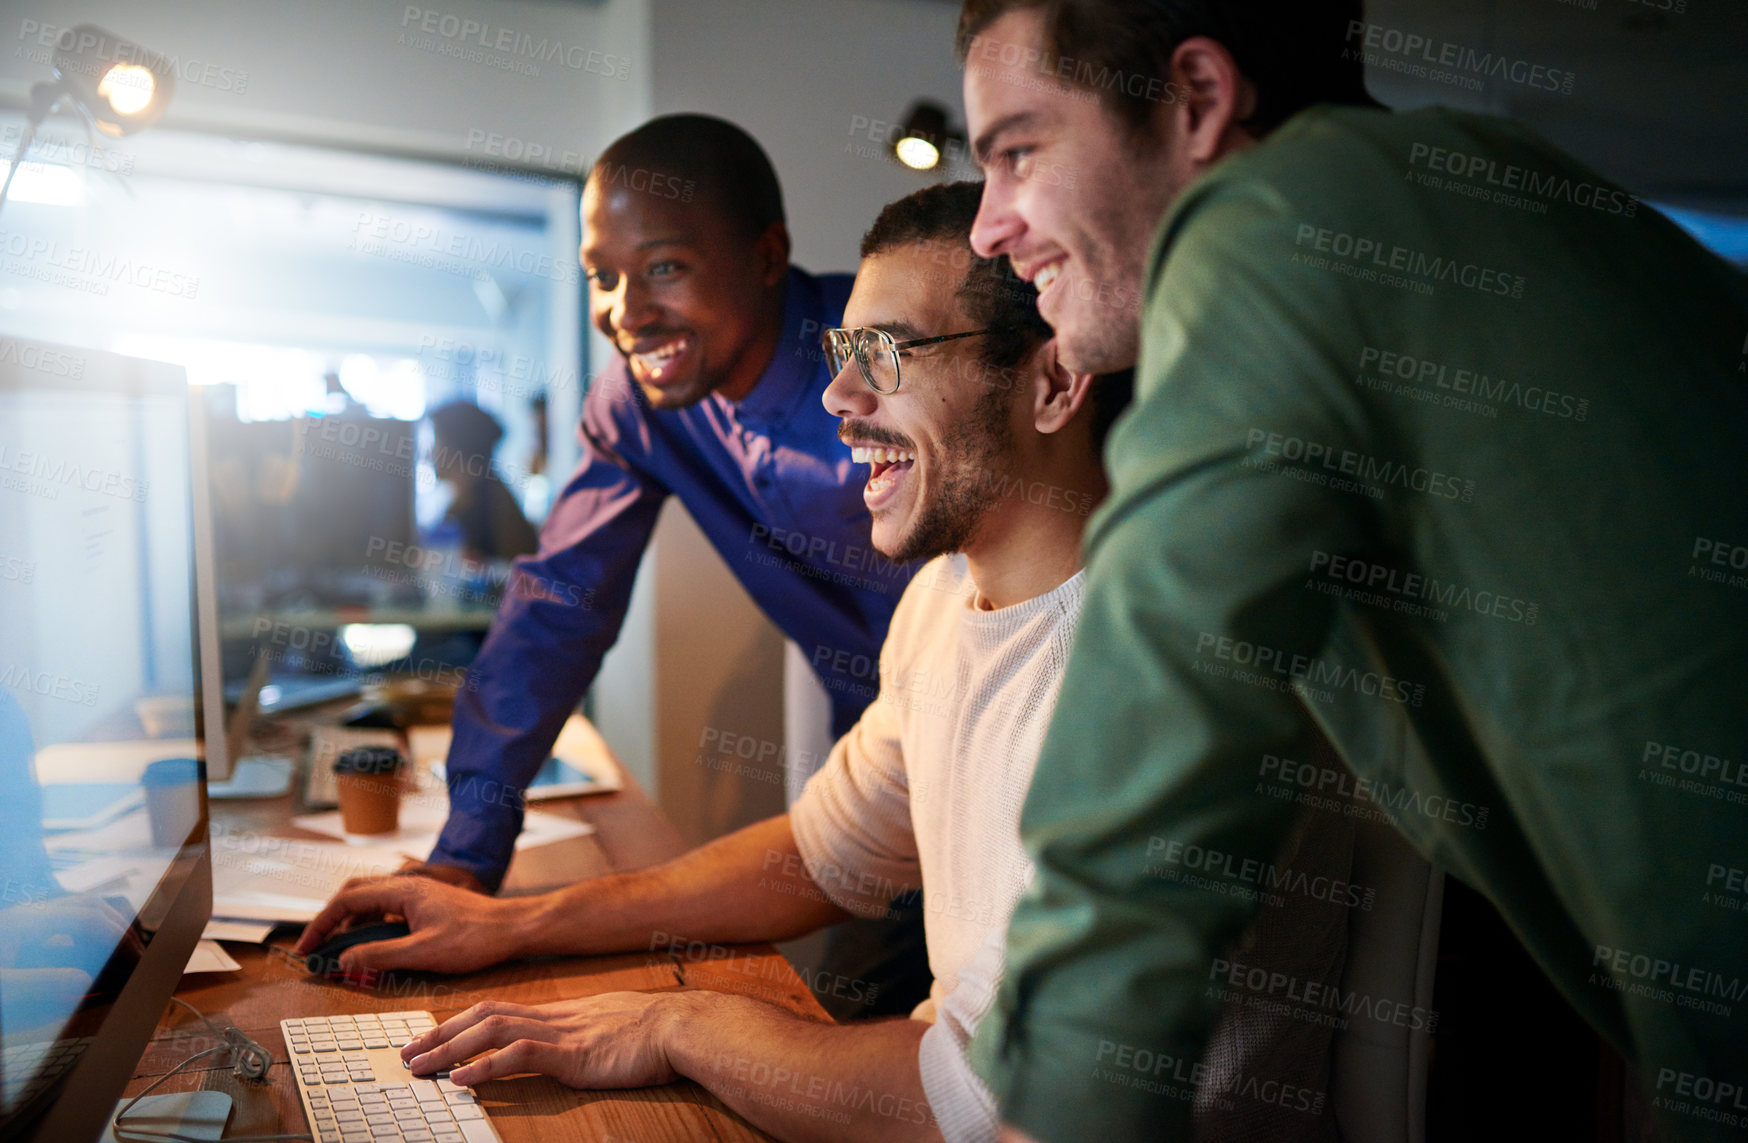 Buy stock photo Shot of a team of young businesspeople working late in the office